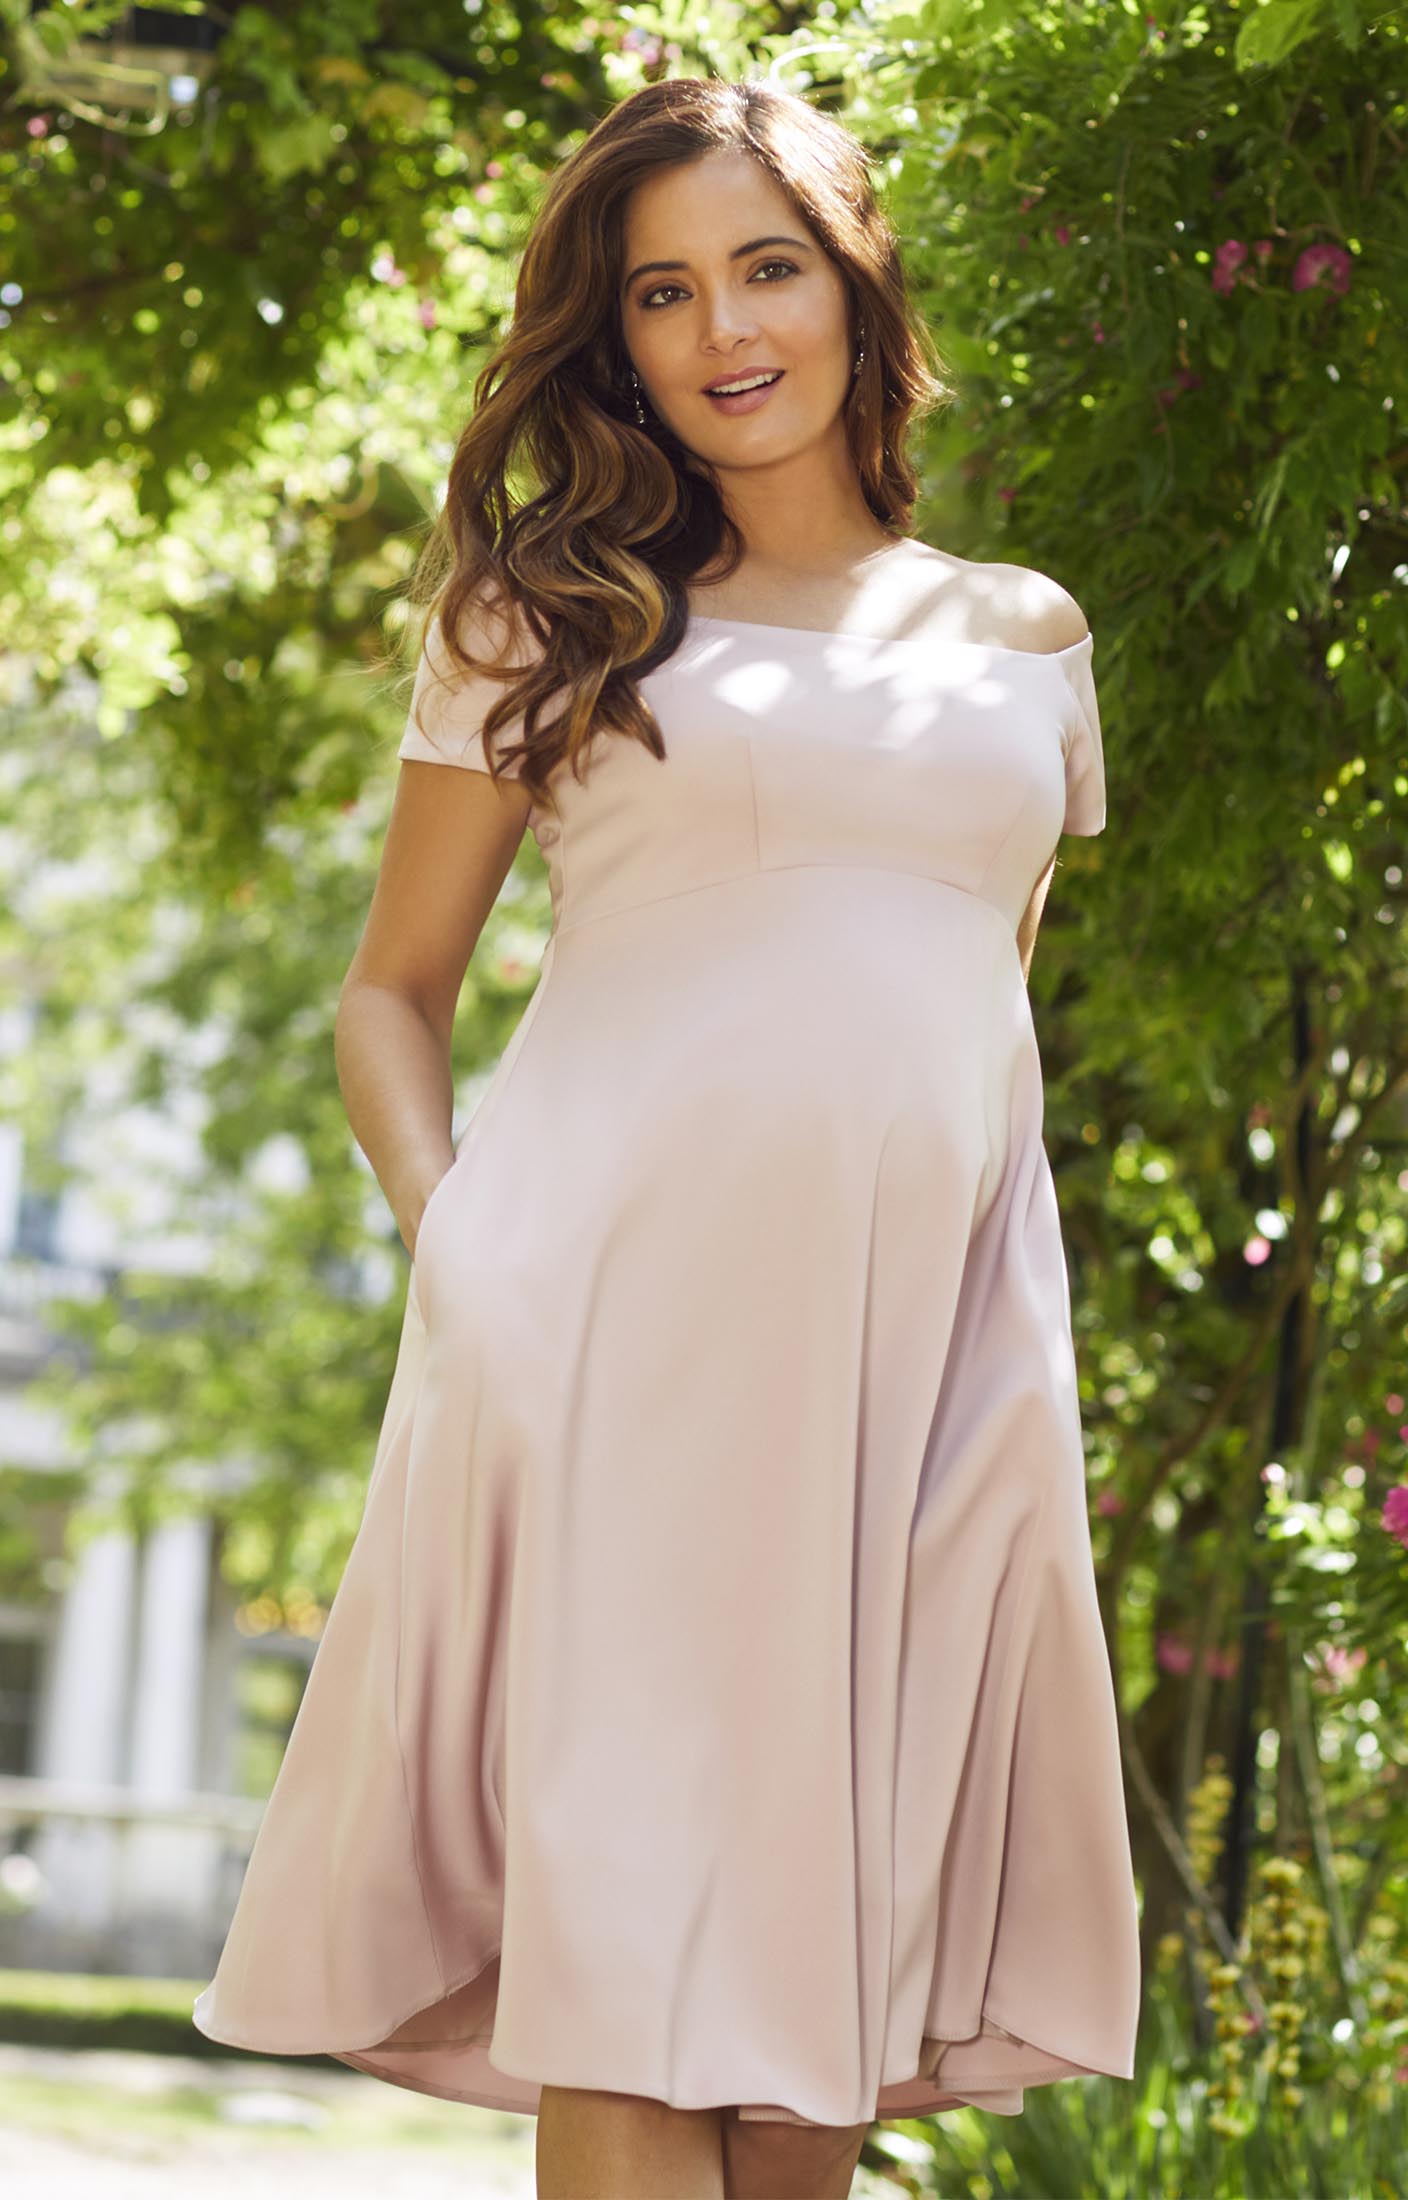 Maternity-Lace-dress-for-Wedding-Evening-Formal-Party  special occasion dress